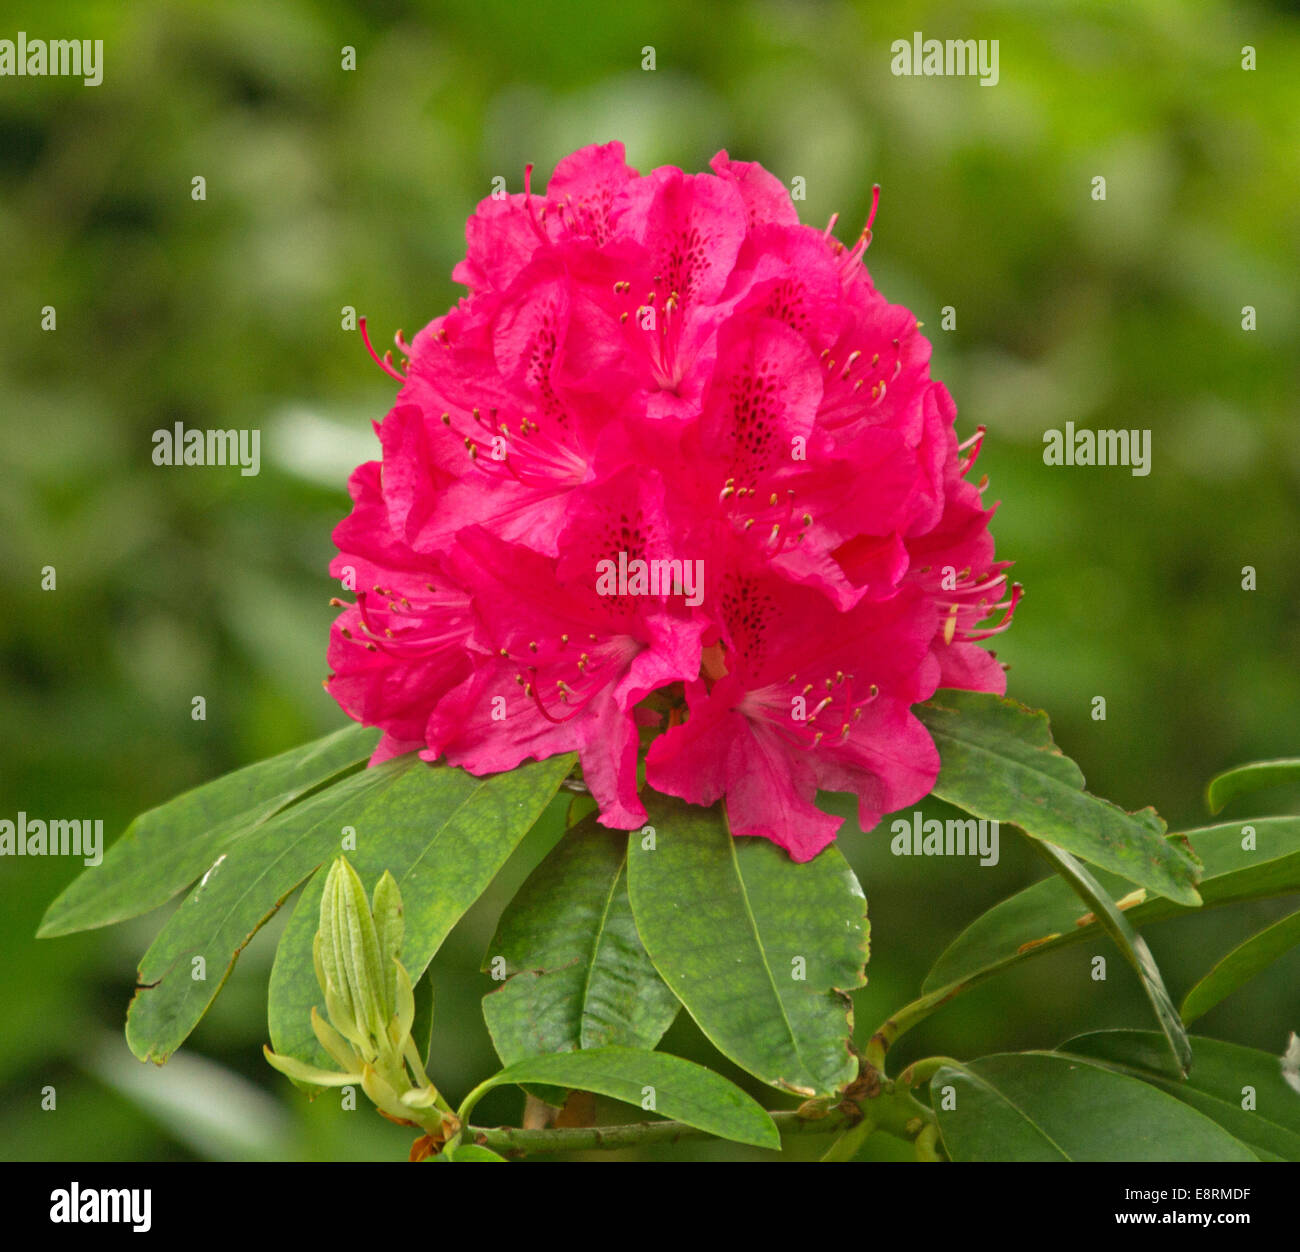 Large cluster of bright magenta red rhododendron flowers and green foliage against light green background Stock Photo